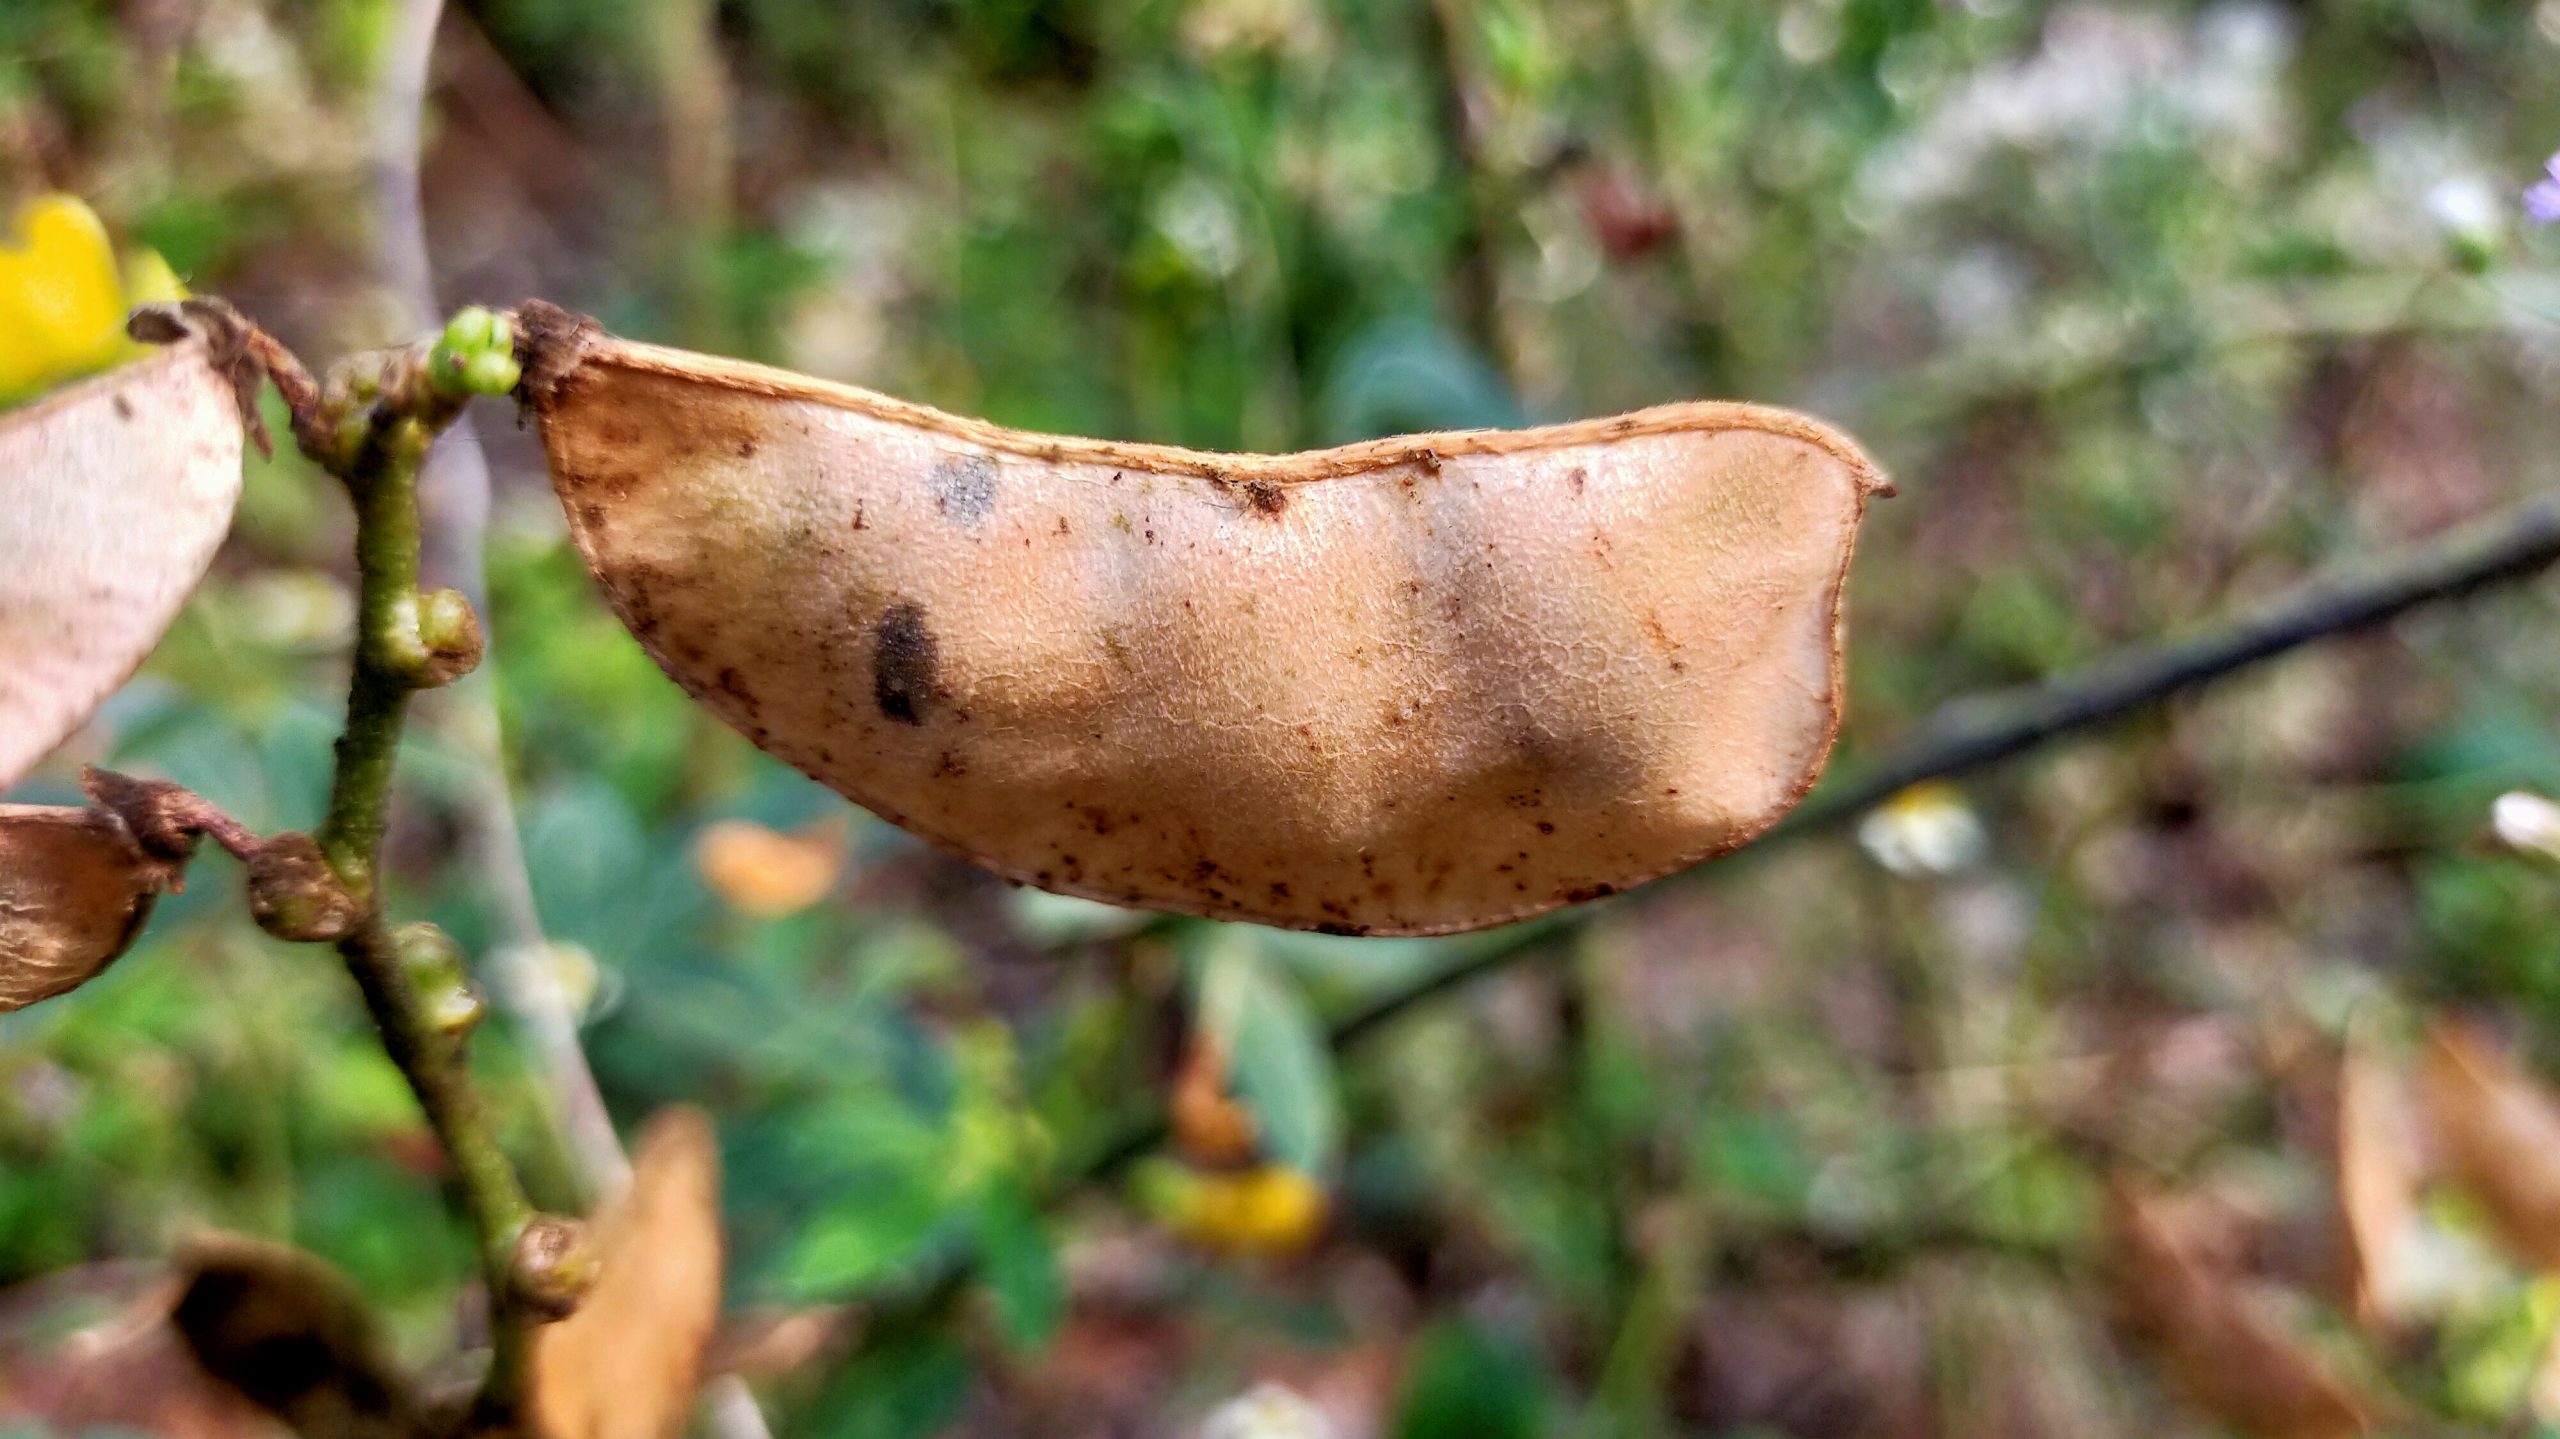 Dry bean of a plant